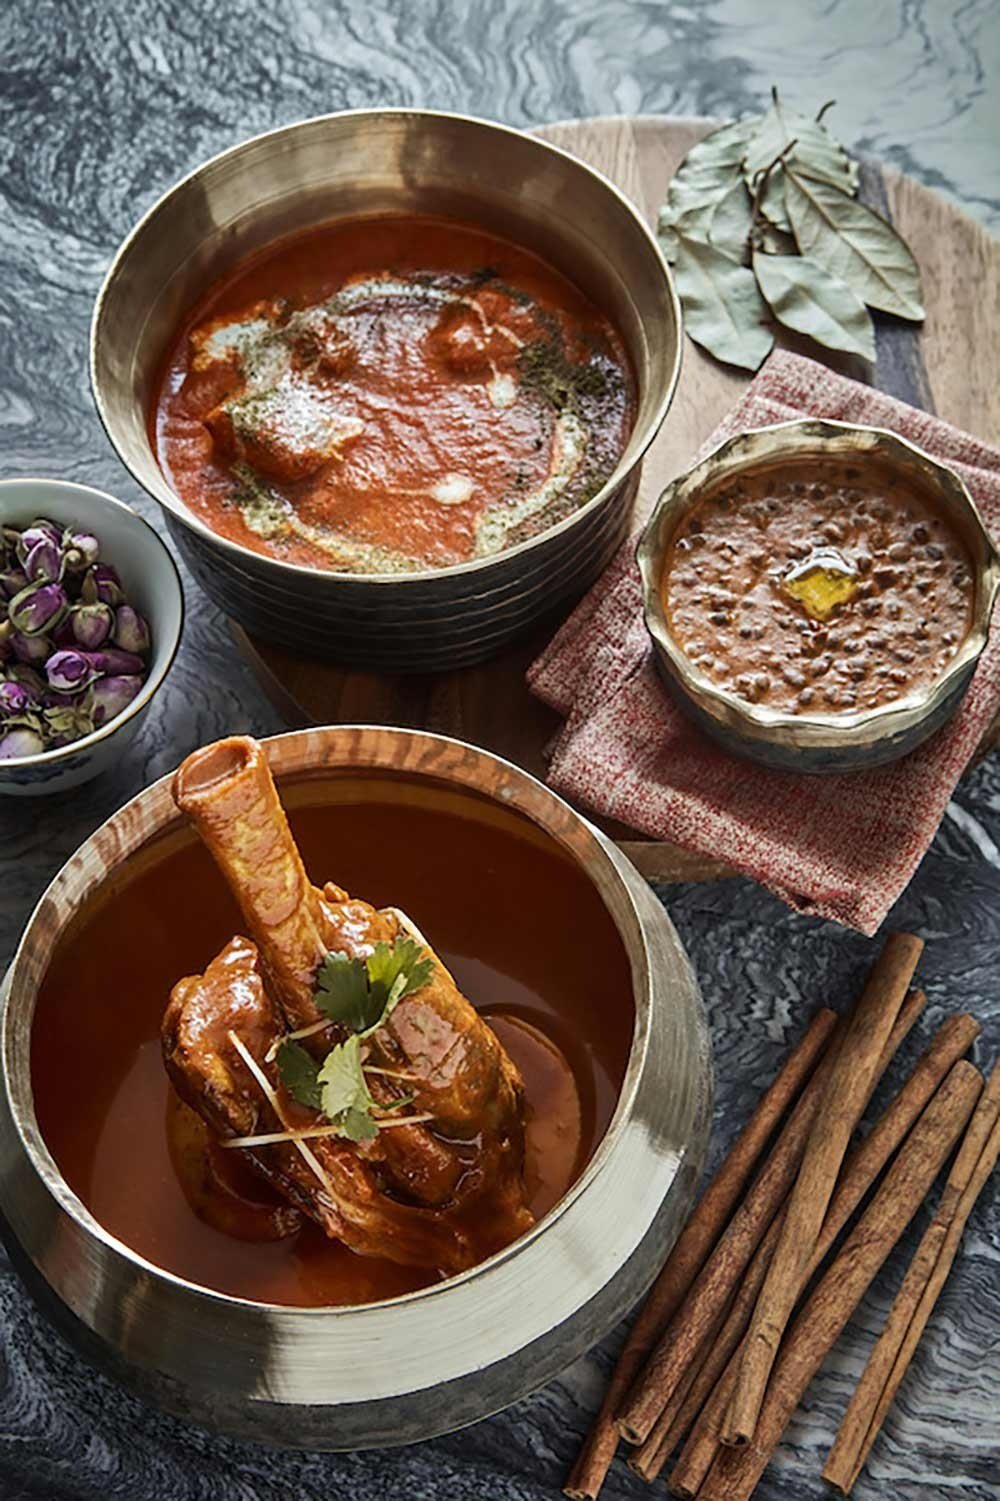 One Michelin-Starred CHAAT in Rosewood Hong Kong is running a one-night-only Anglo-Indian dinner on 2nd June 2022